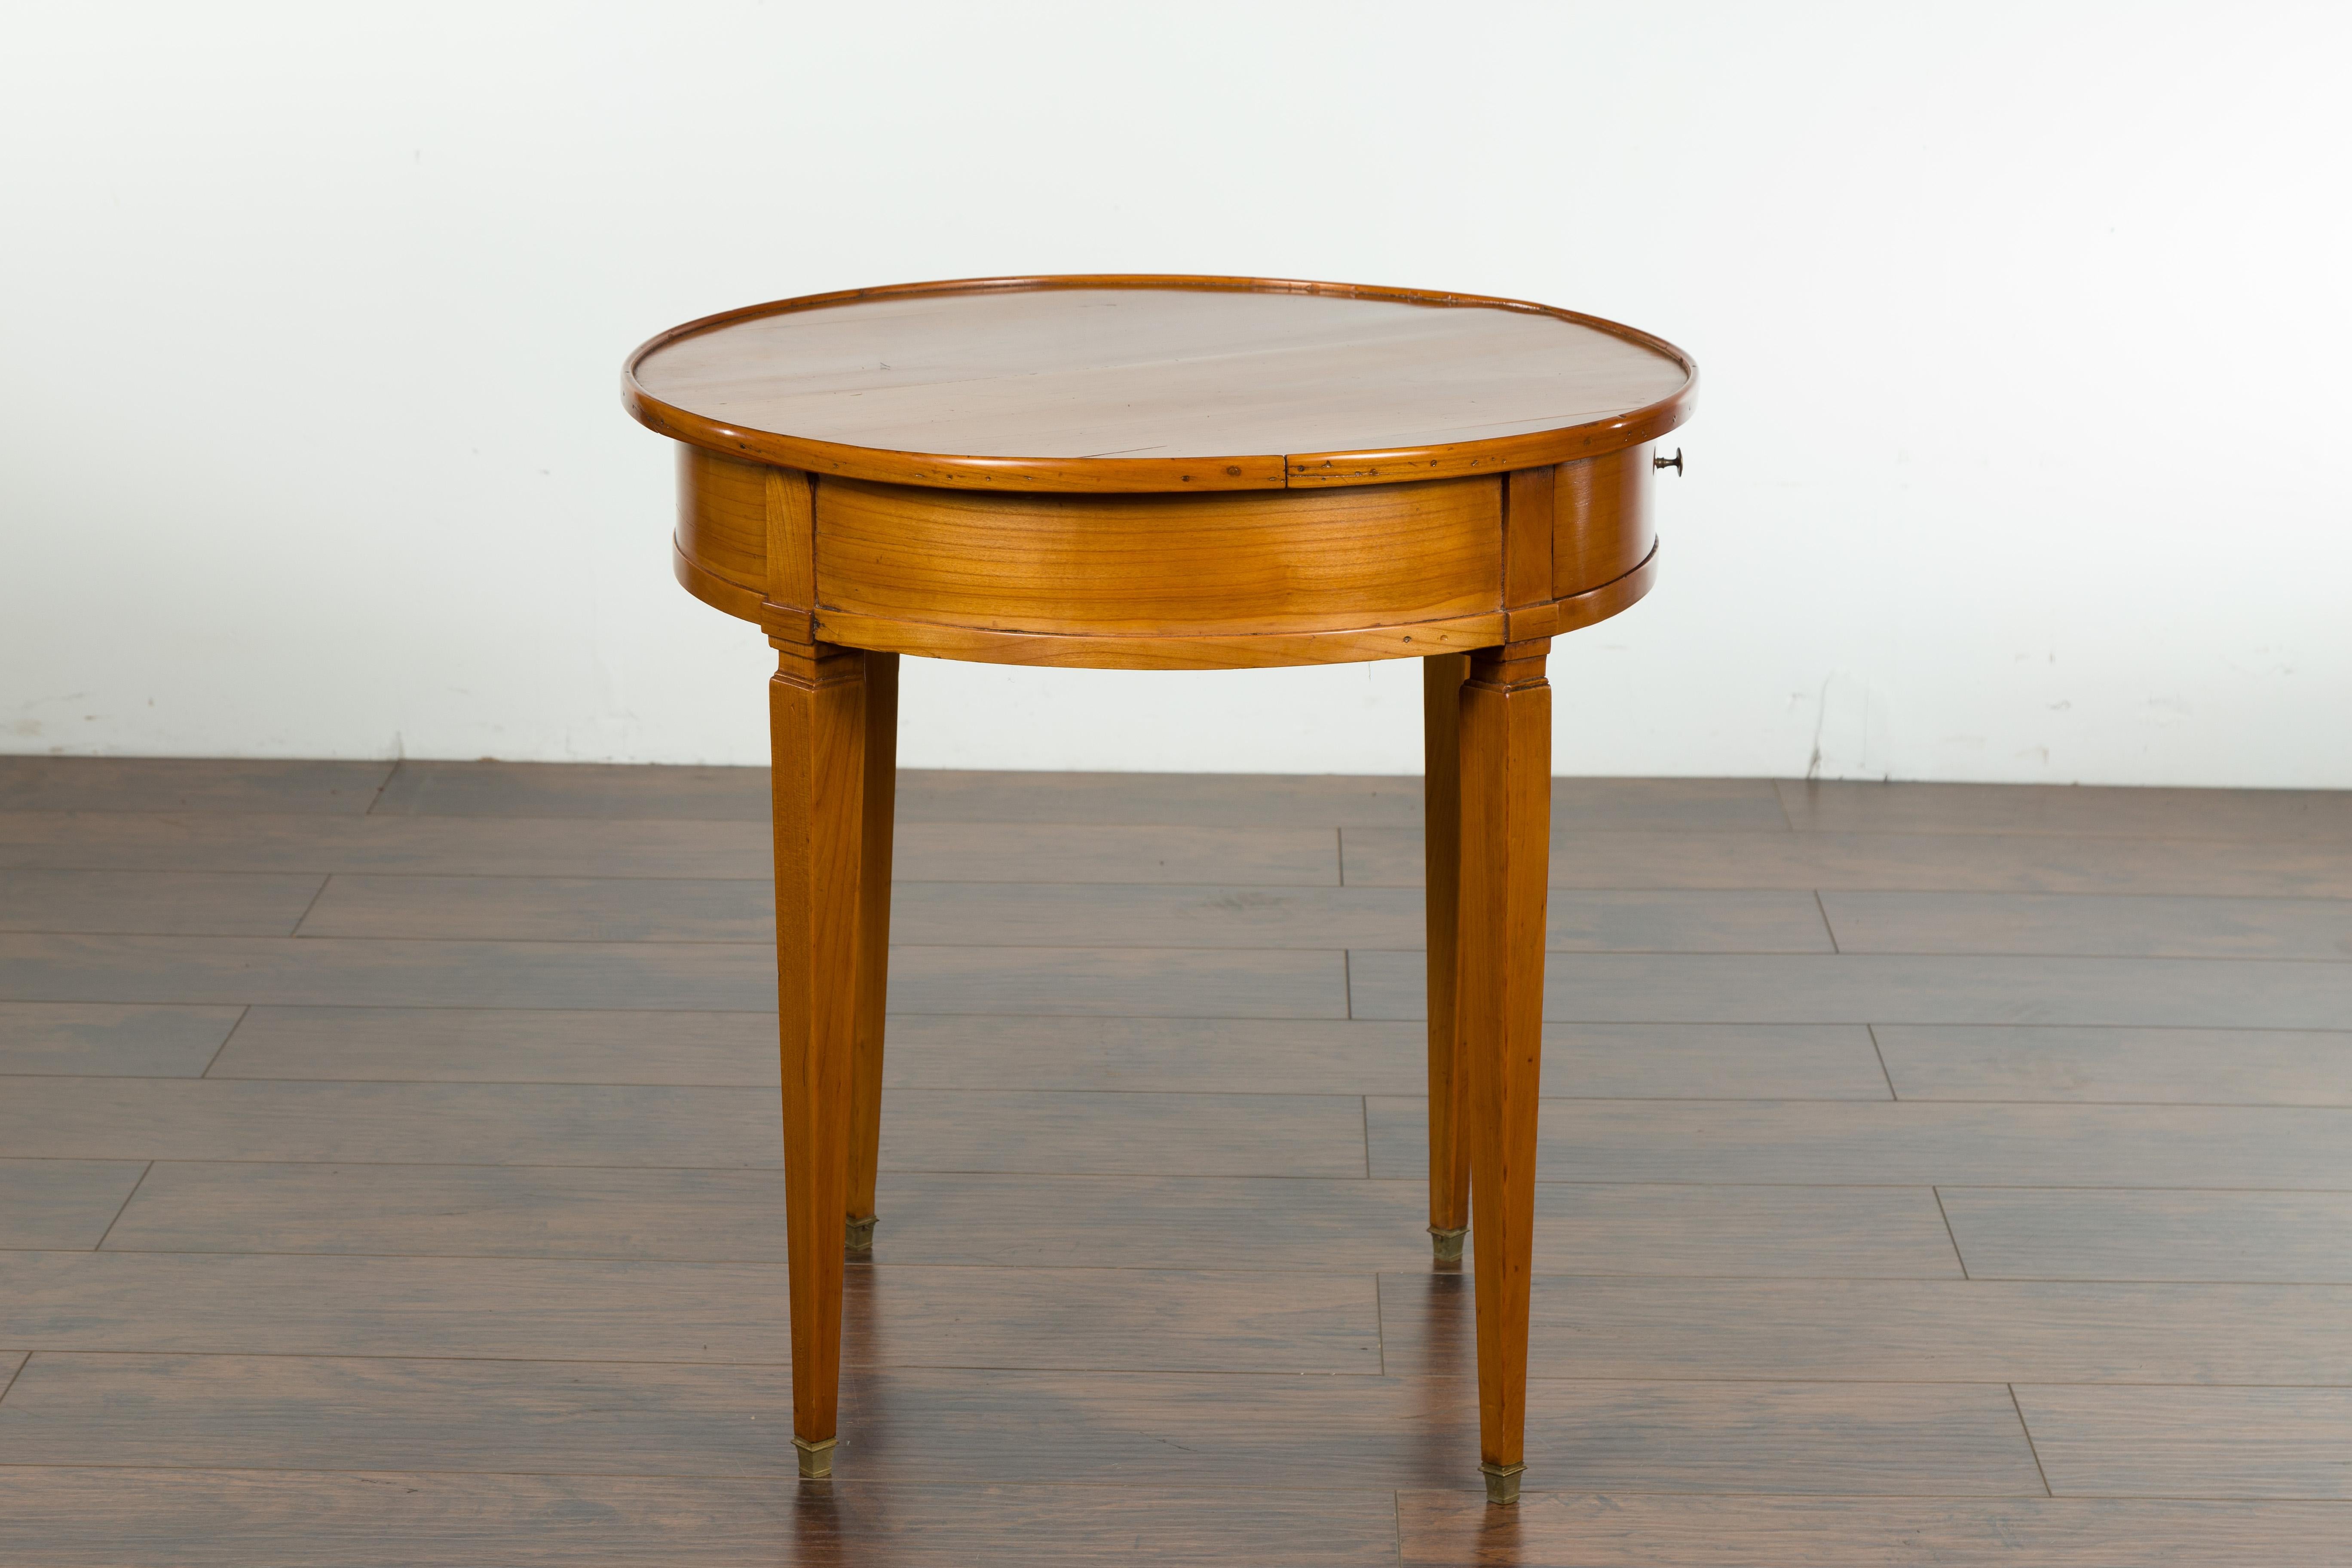 French Napoléon III 1850s Walnut Side Table with Single Drawer and Tapered Legs For Sale 4